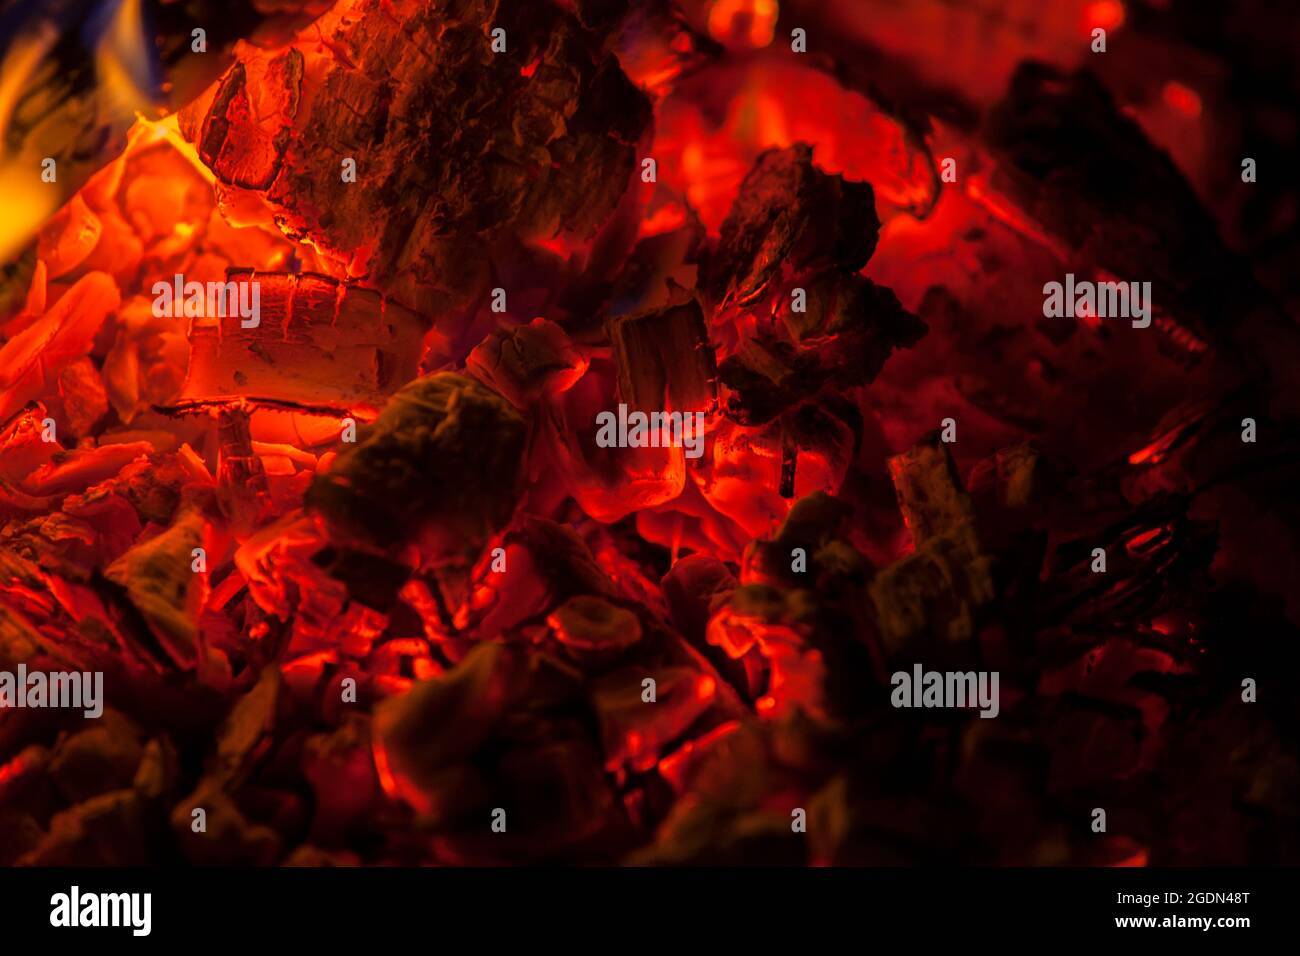 Embers after a bonfire Stock Photo